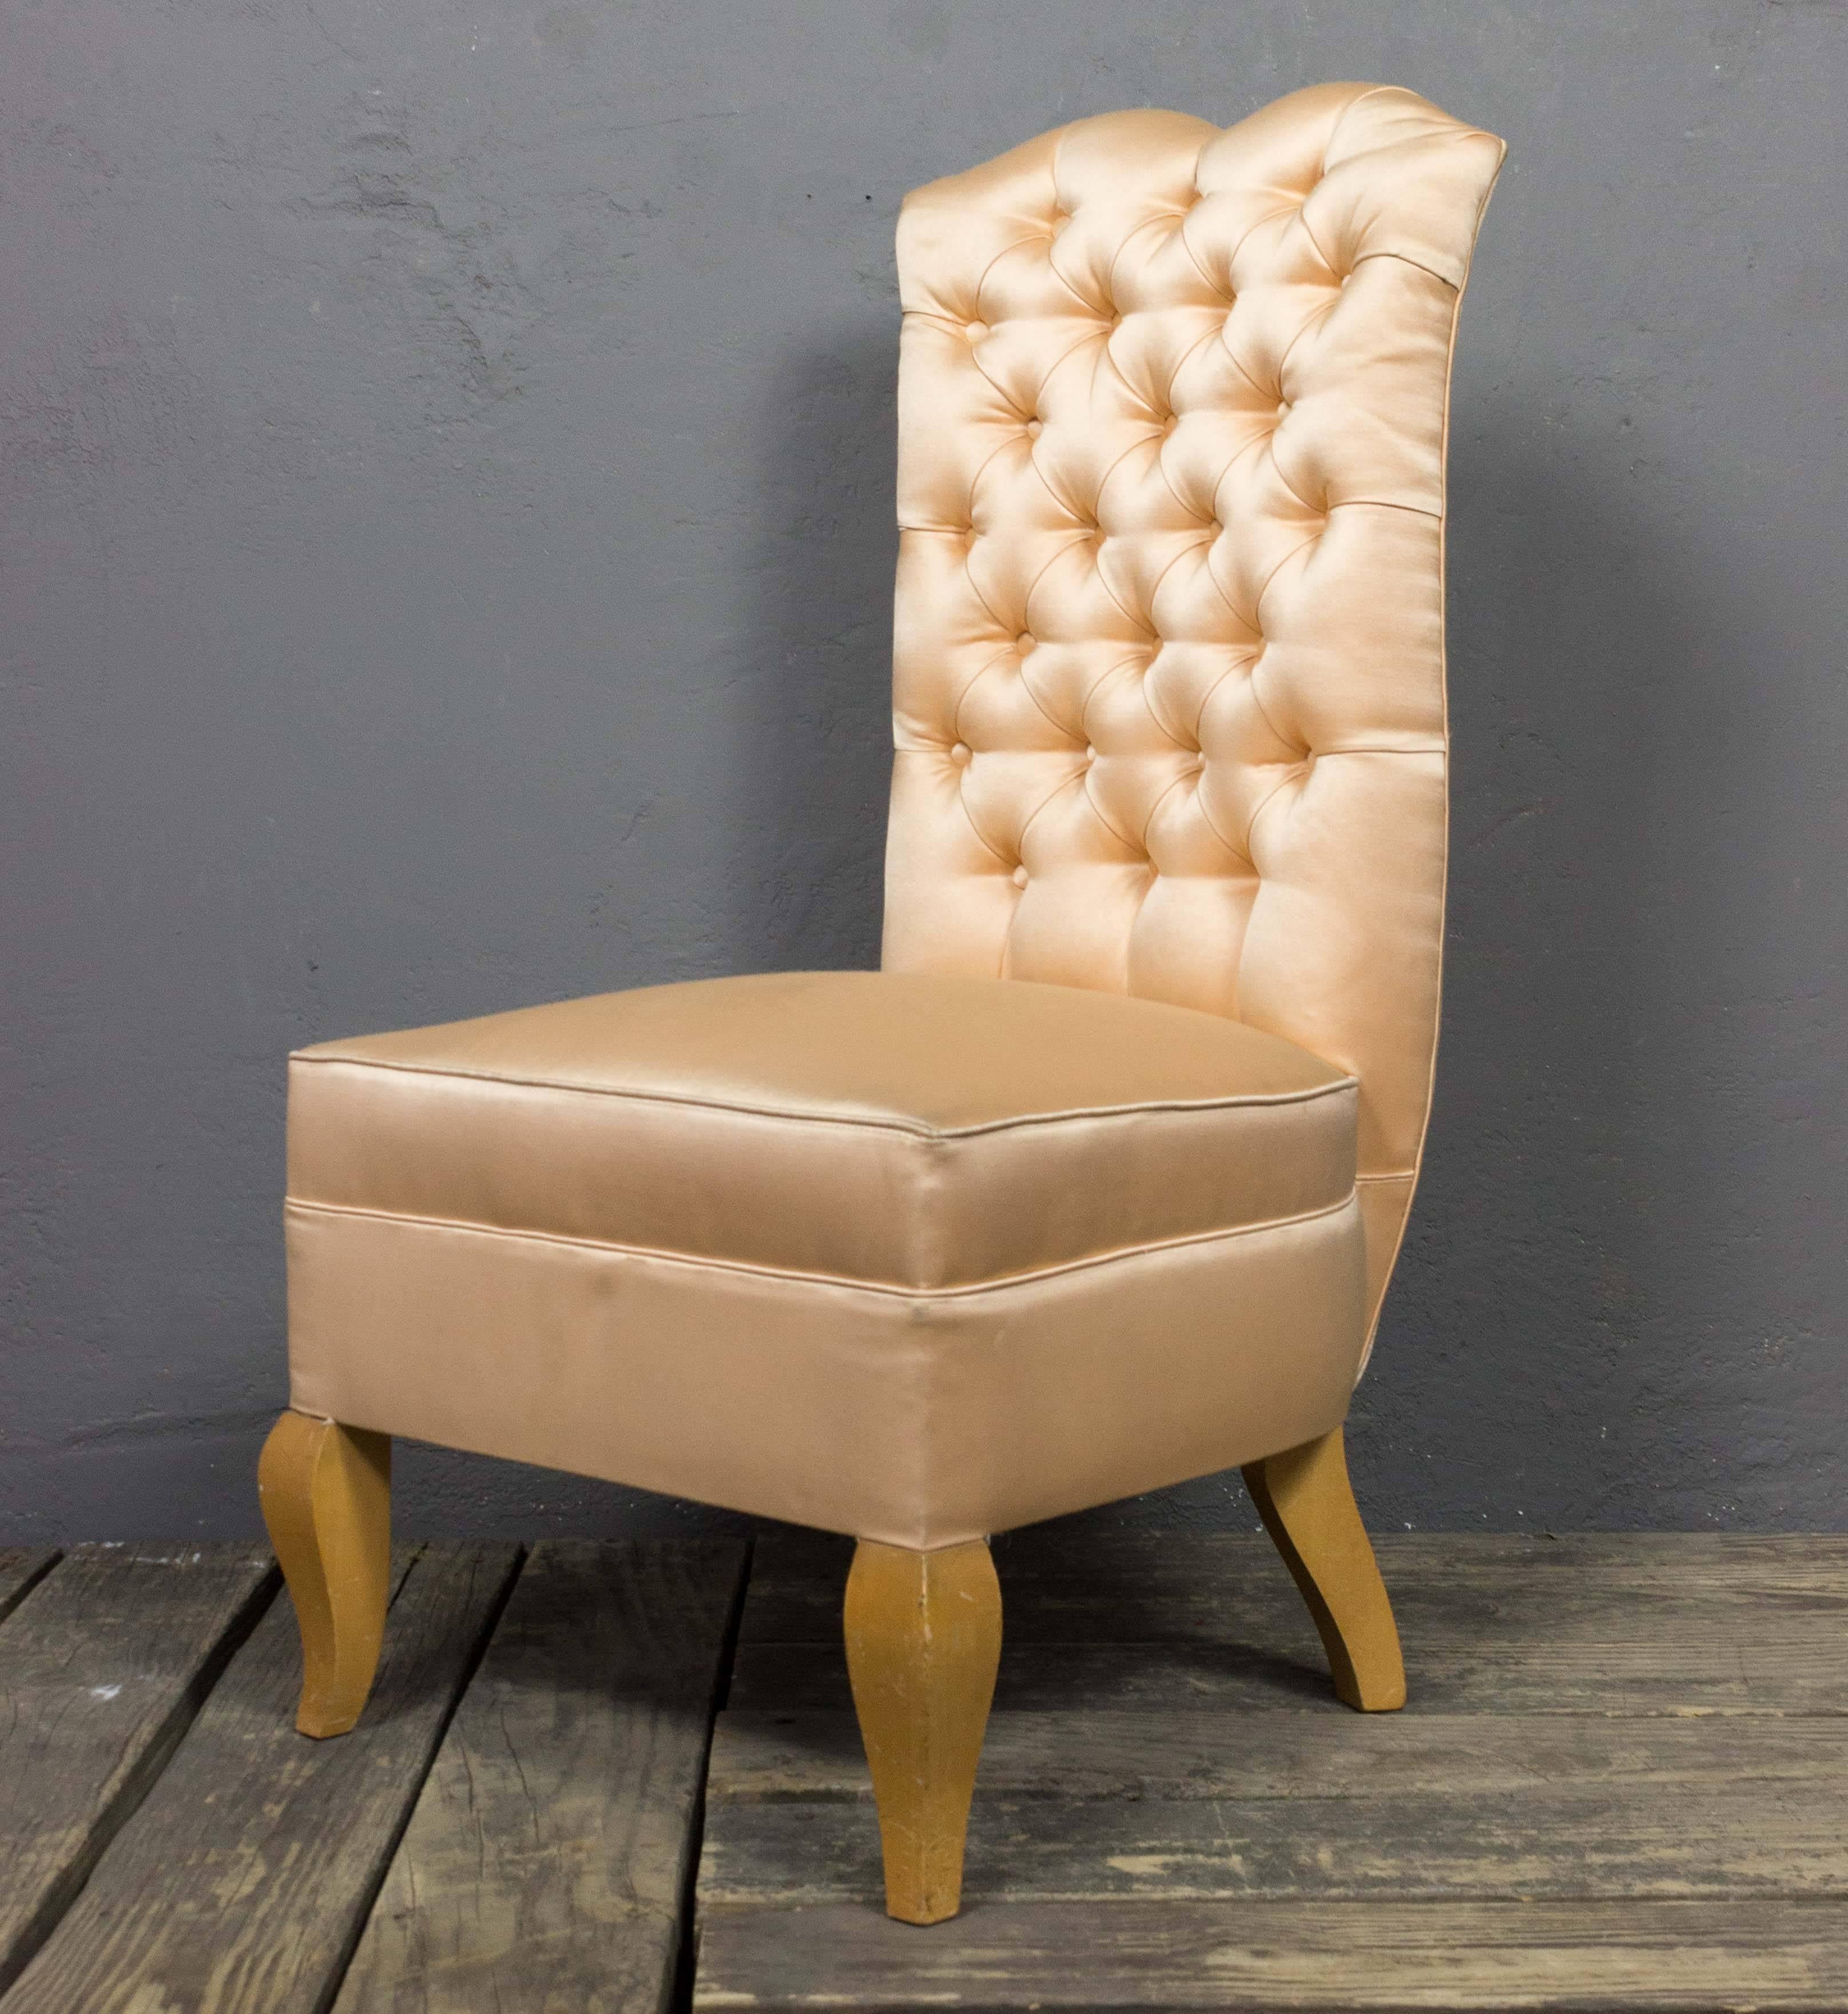 An exquisite 1940s French tufted slipper chair. This tufted high back slipper chair is a beautiful piece of French furniture from the 20th century. Upholstered in a light peach satin, it is in good condition, with some appropriate wear and tear